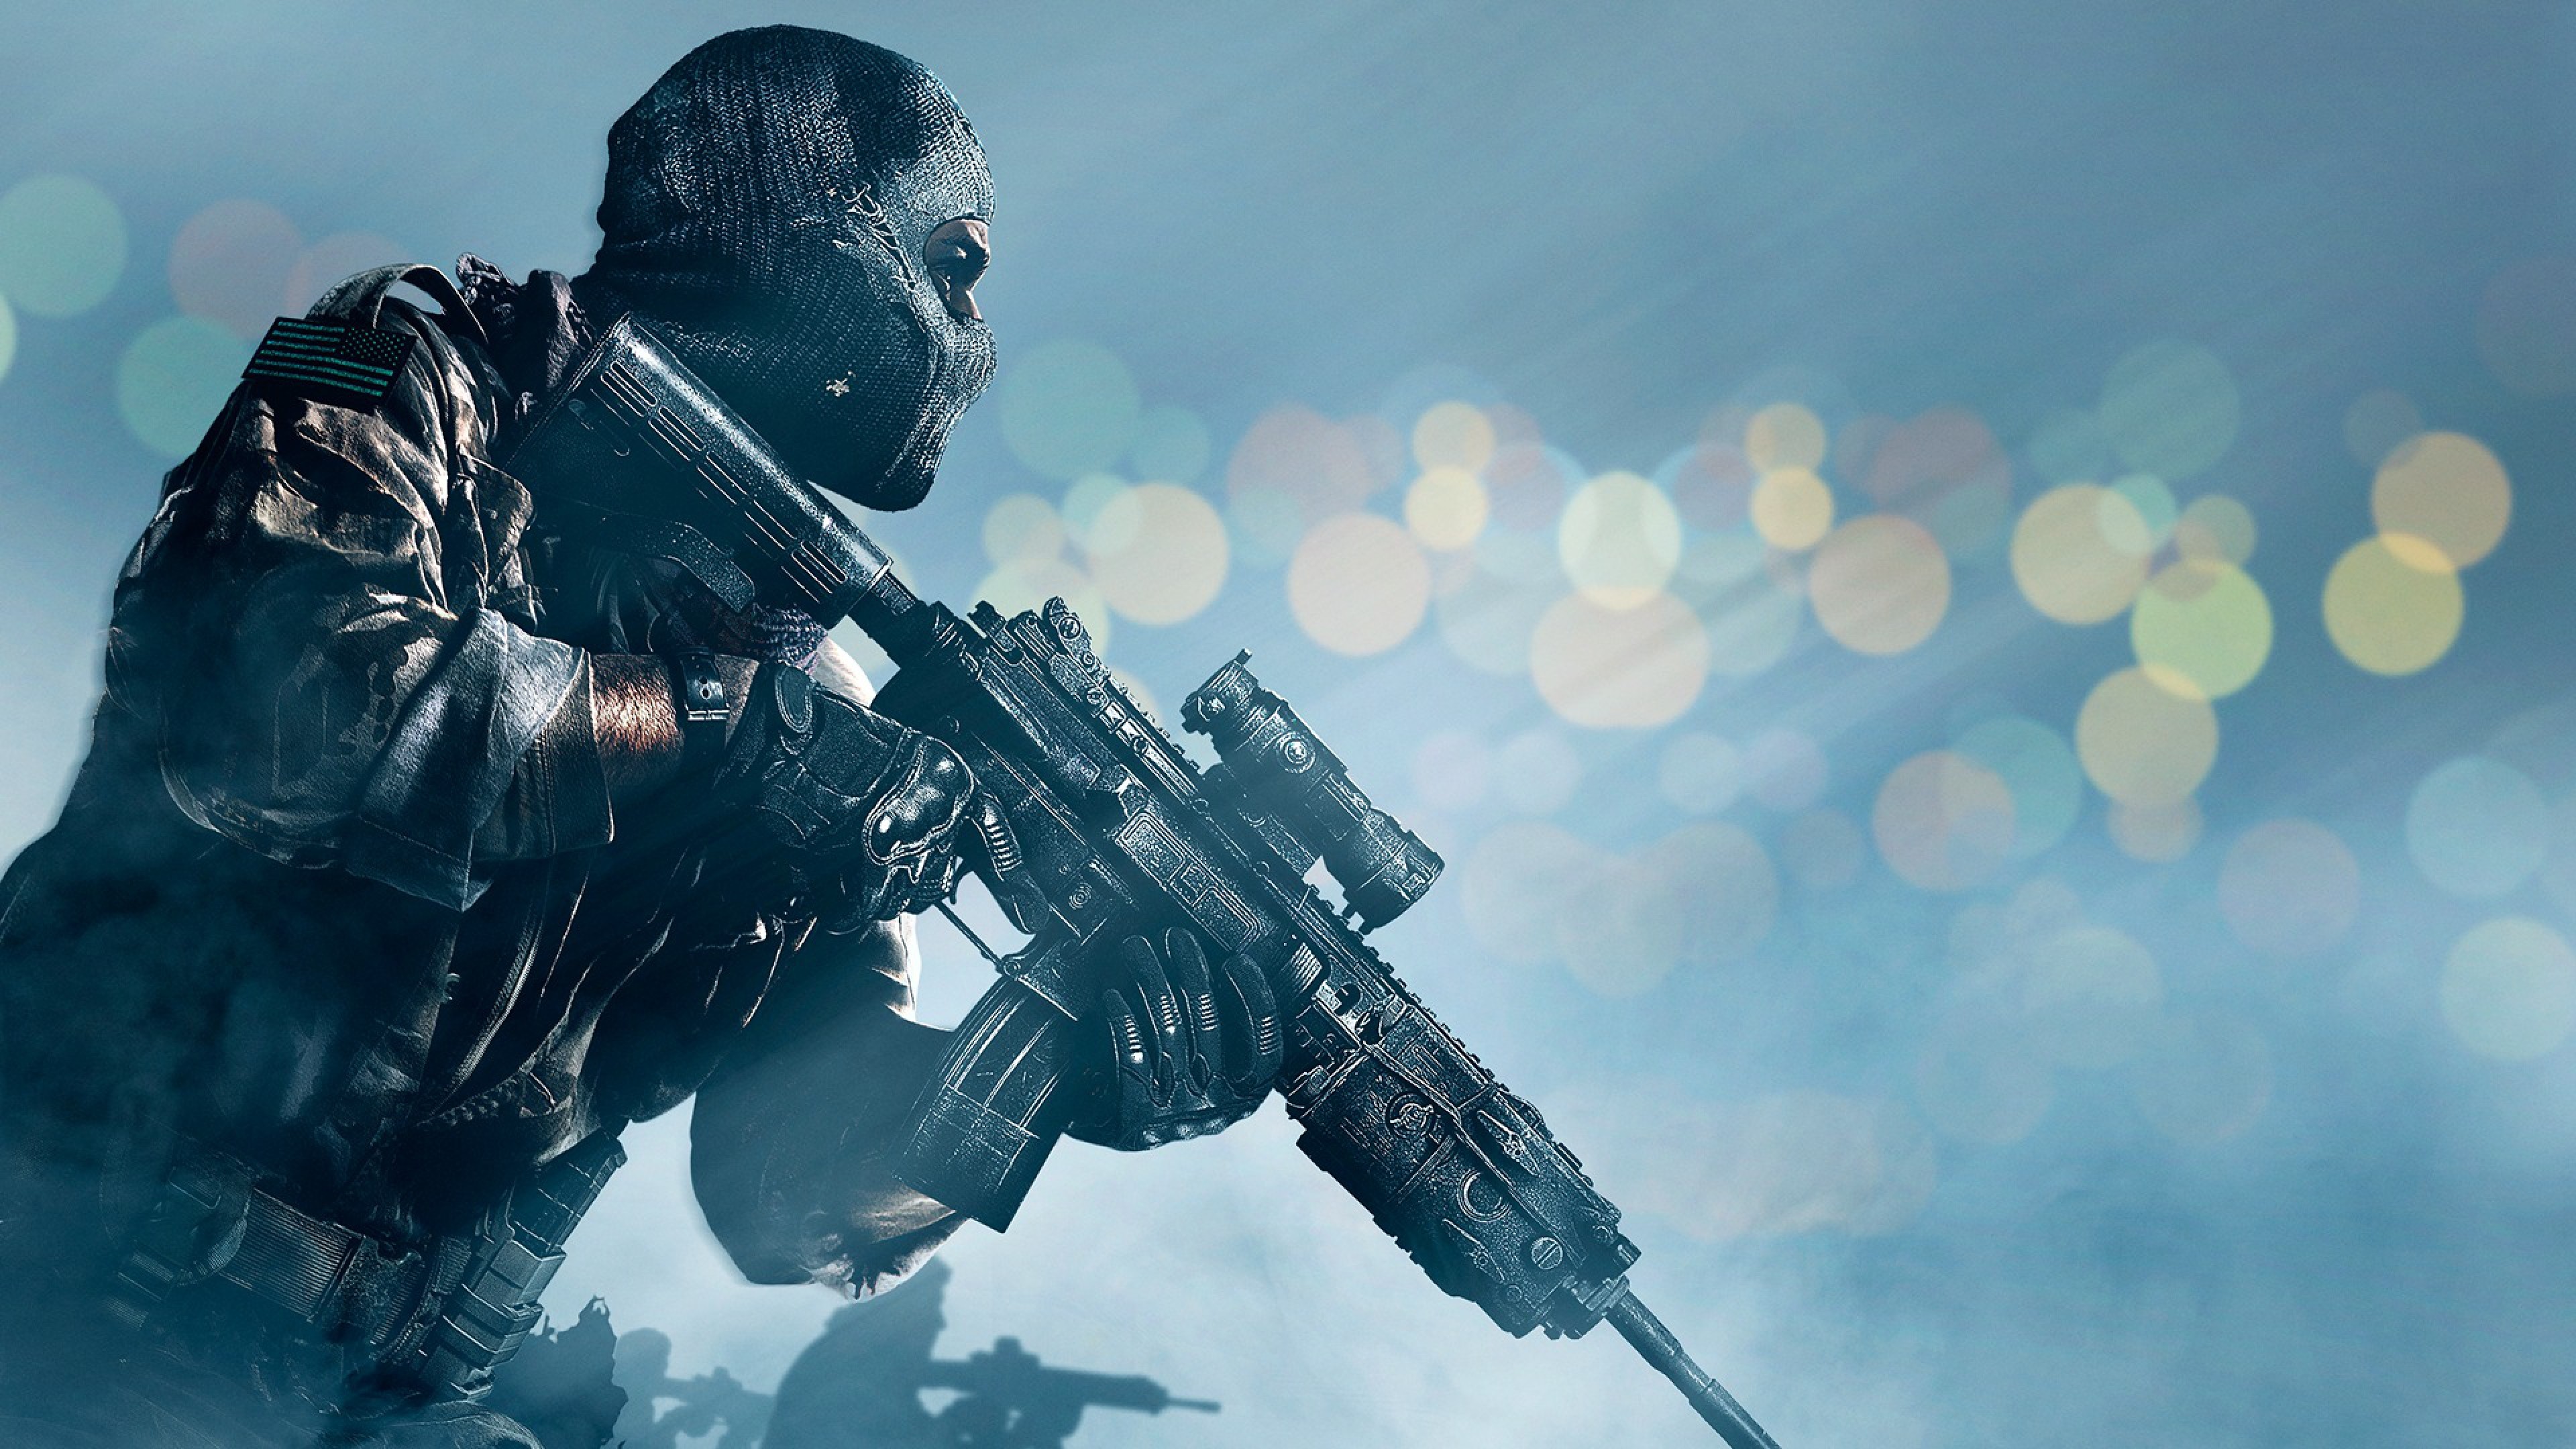 call of duty ghost wallpaper hd,action adventure game,games,pc game,screenshot,cg artwork